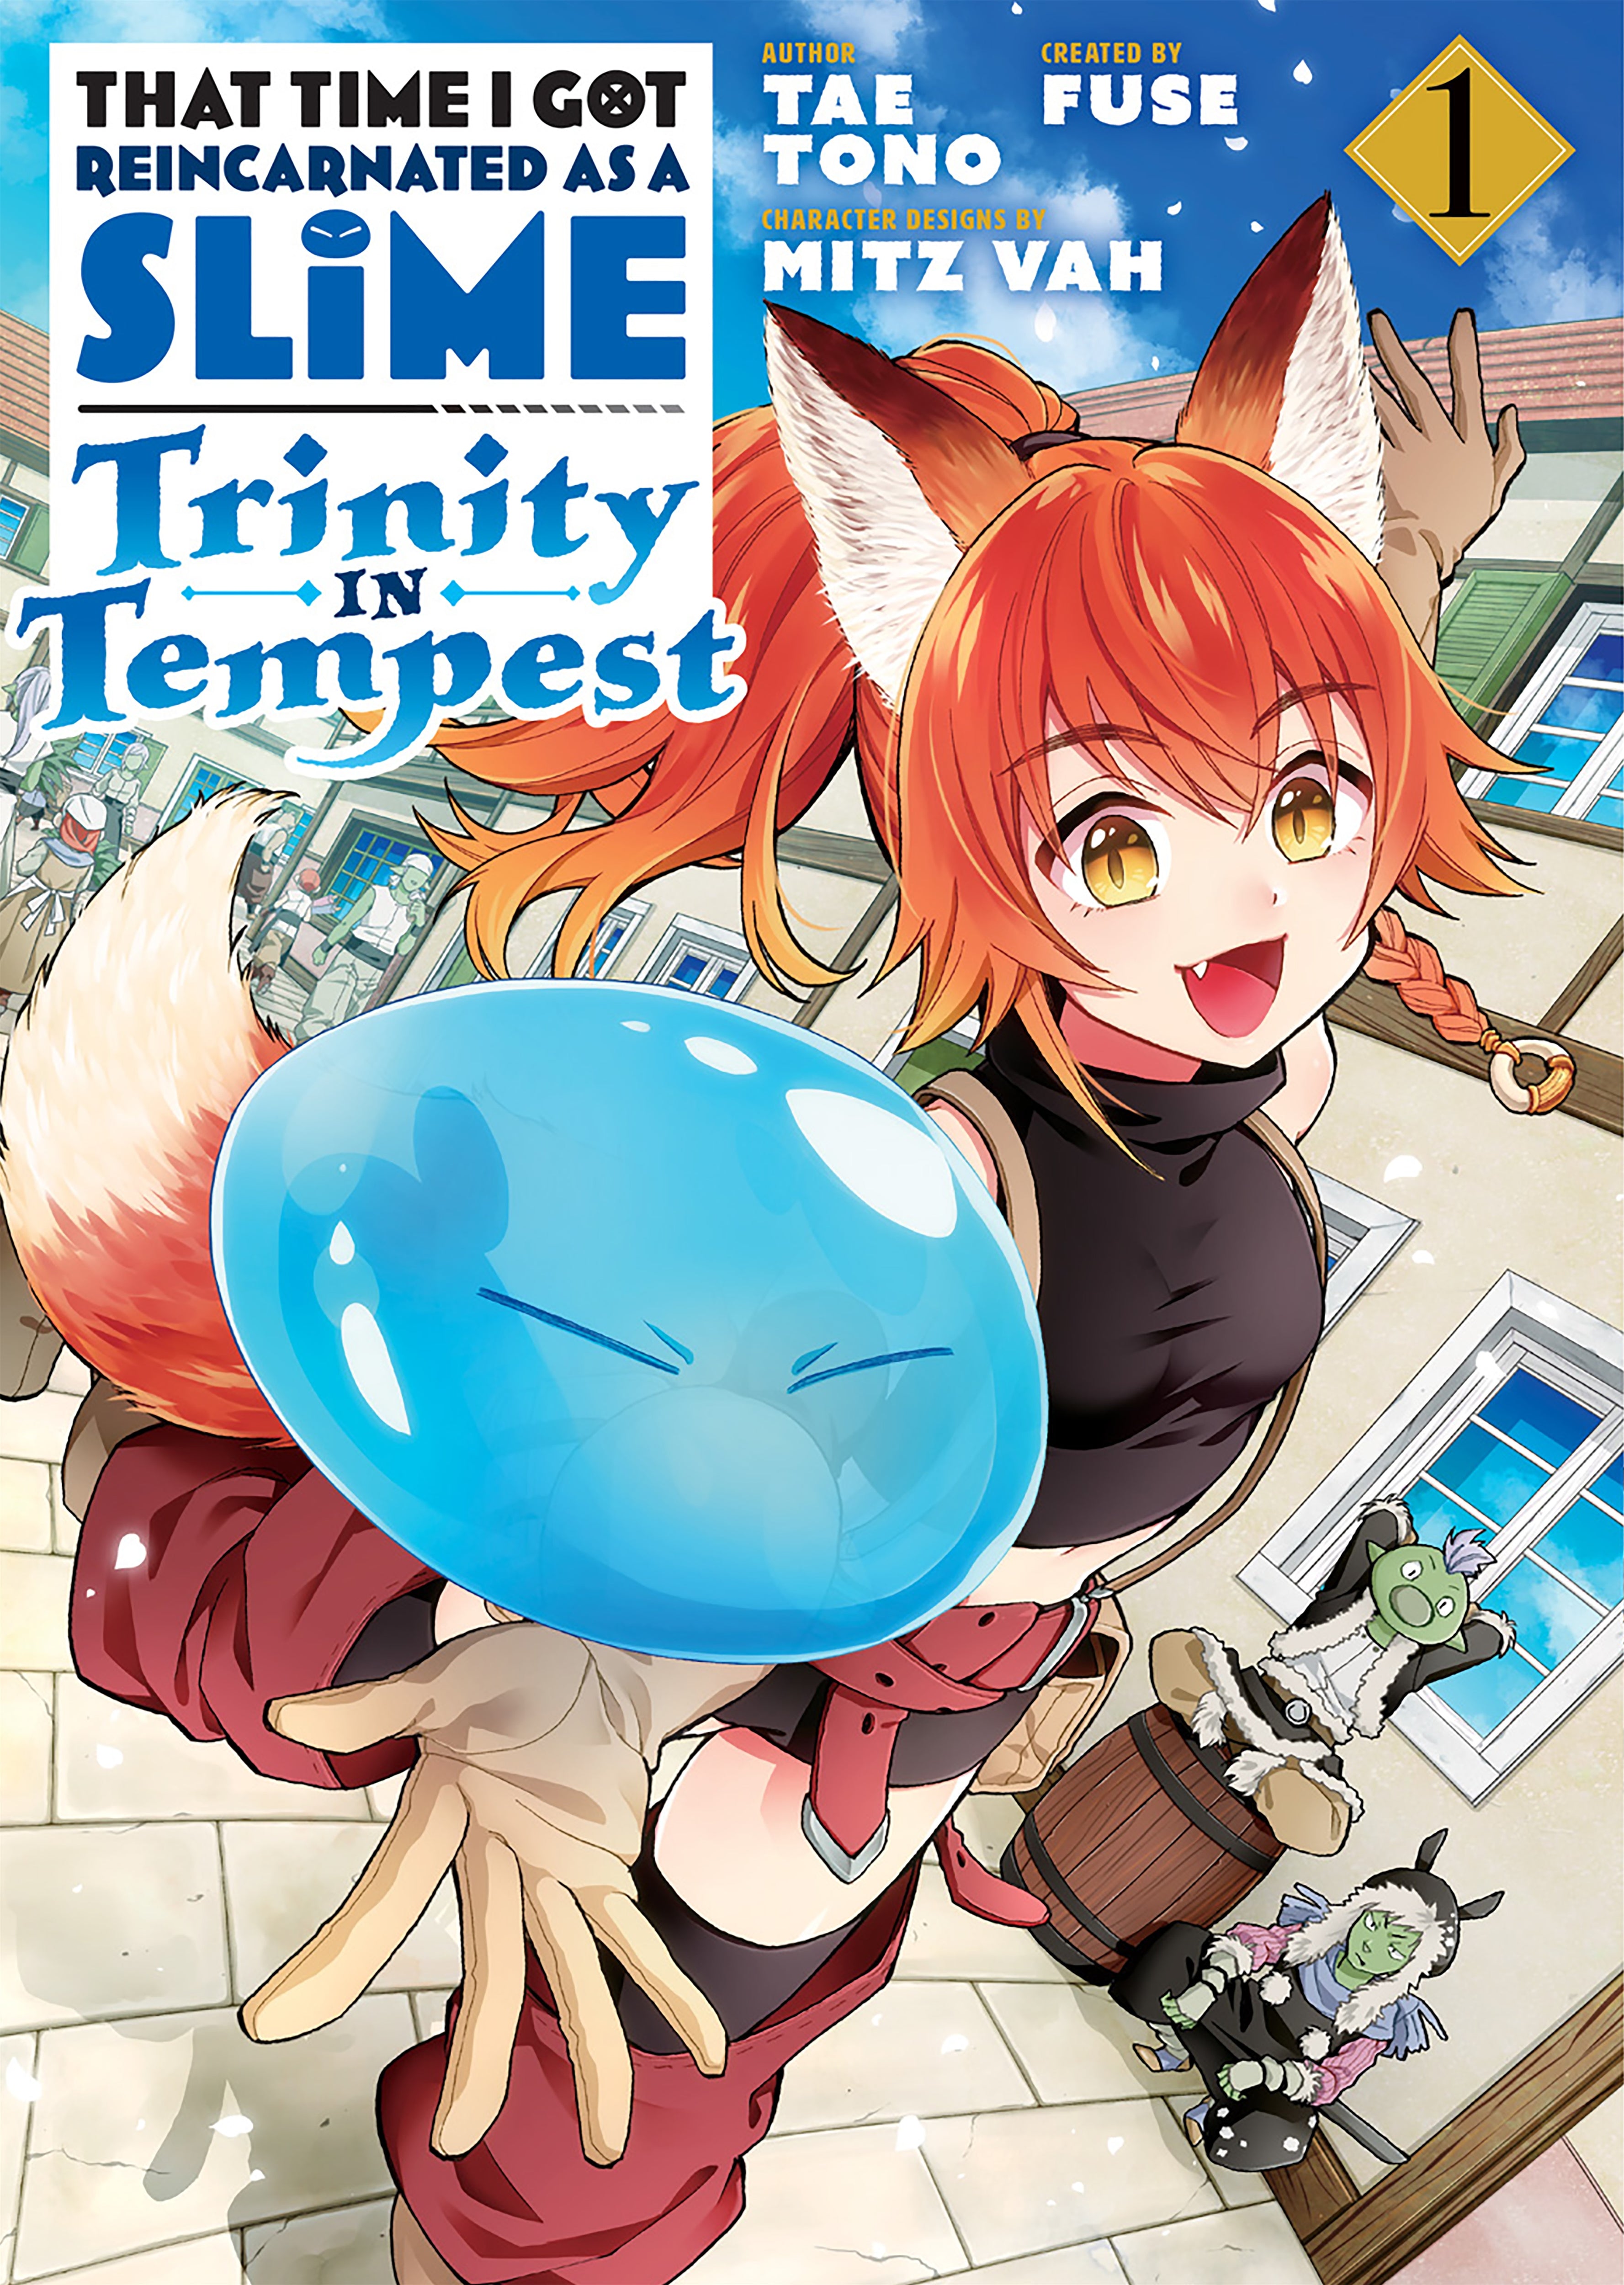 That Time I Got Reincarnated as a Slime Trinity in Tempest (Manga), Vol. 1